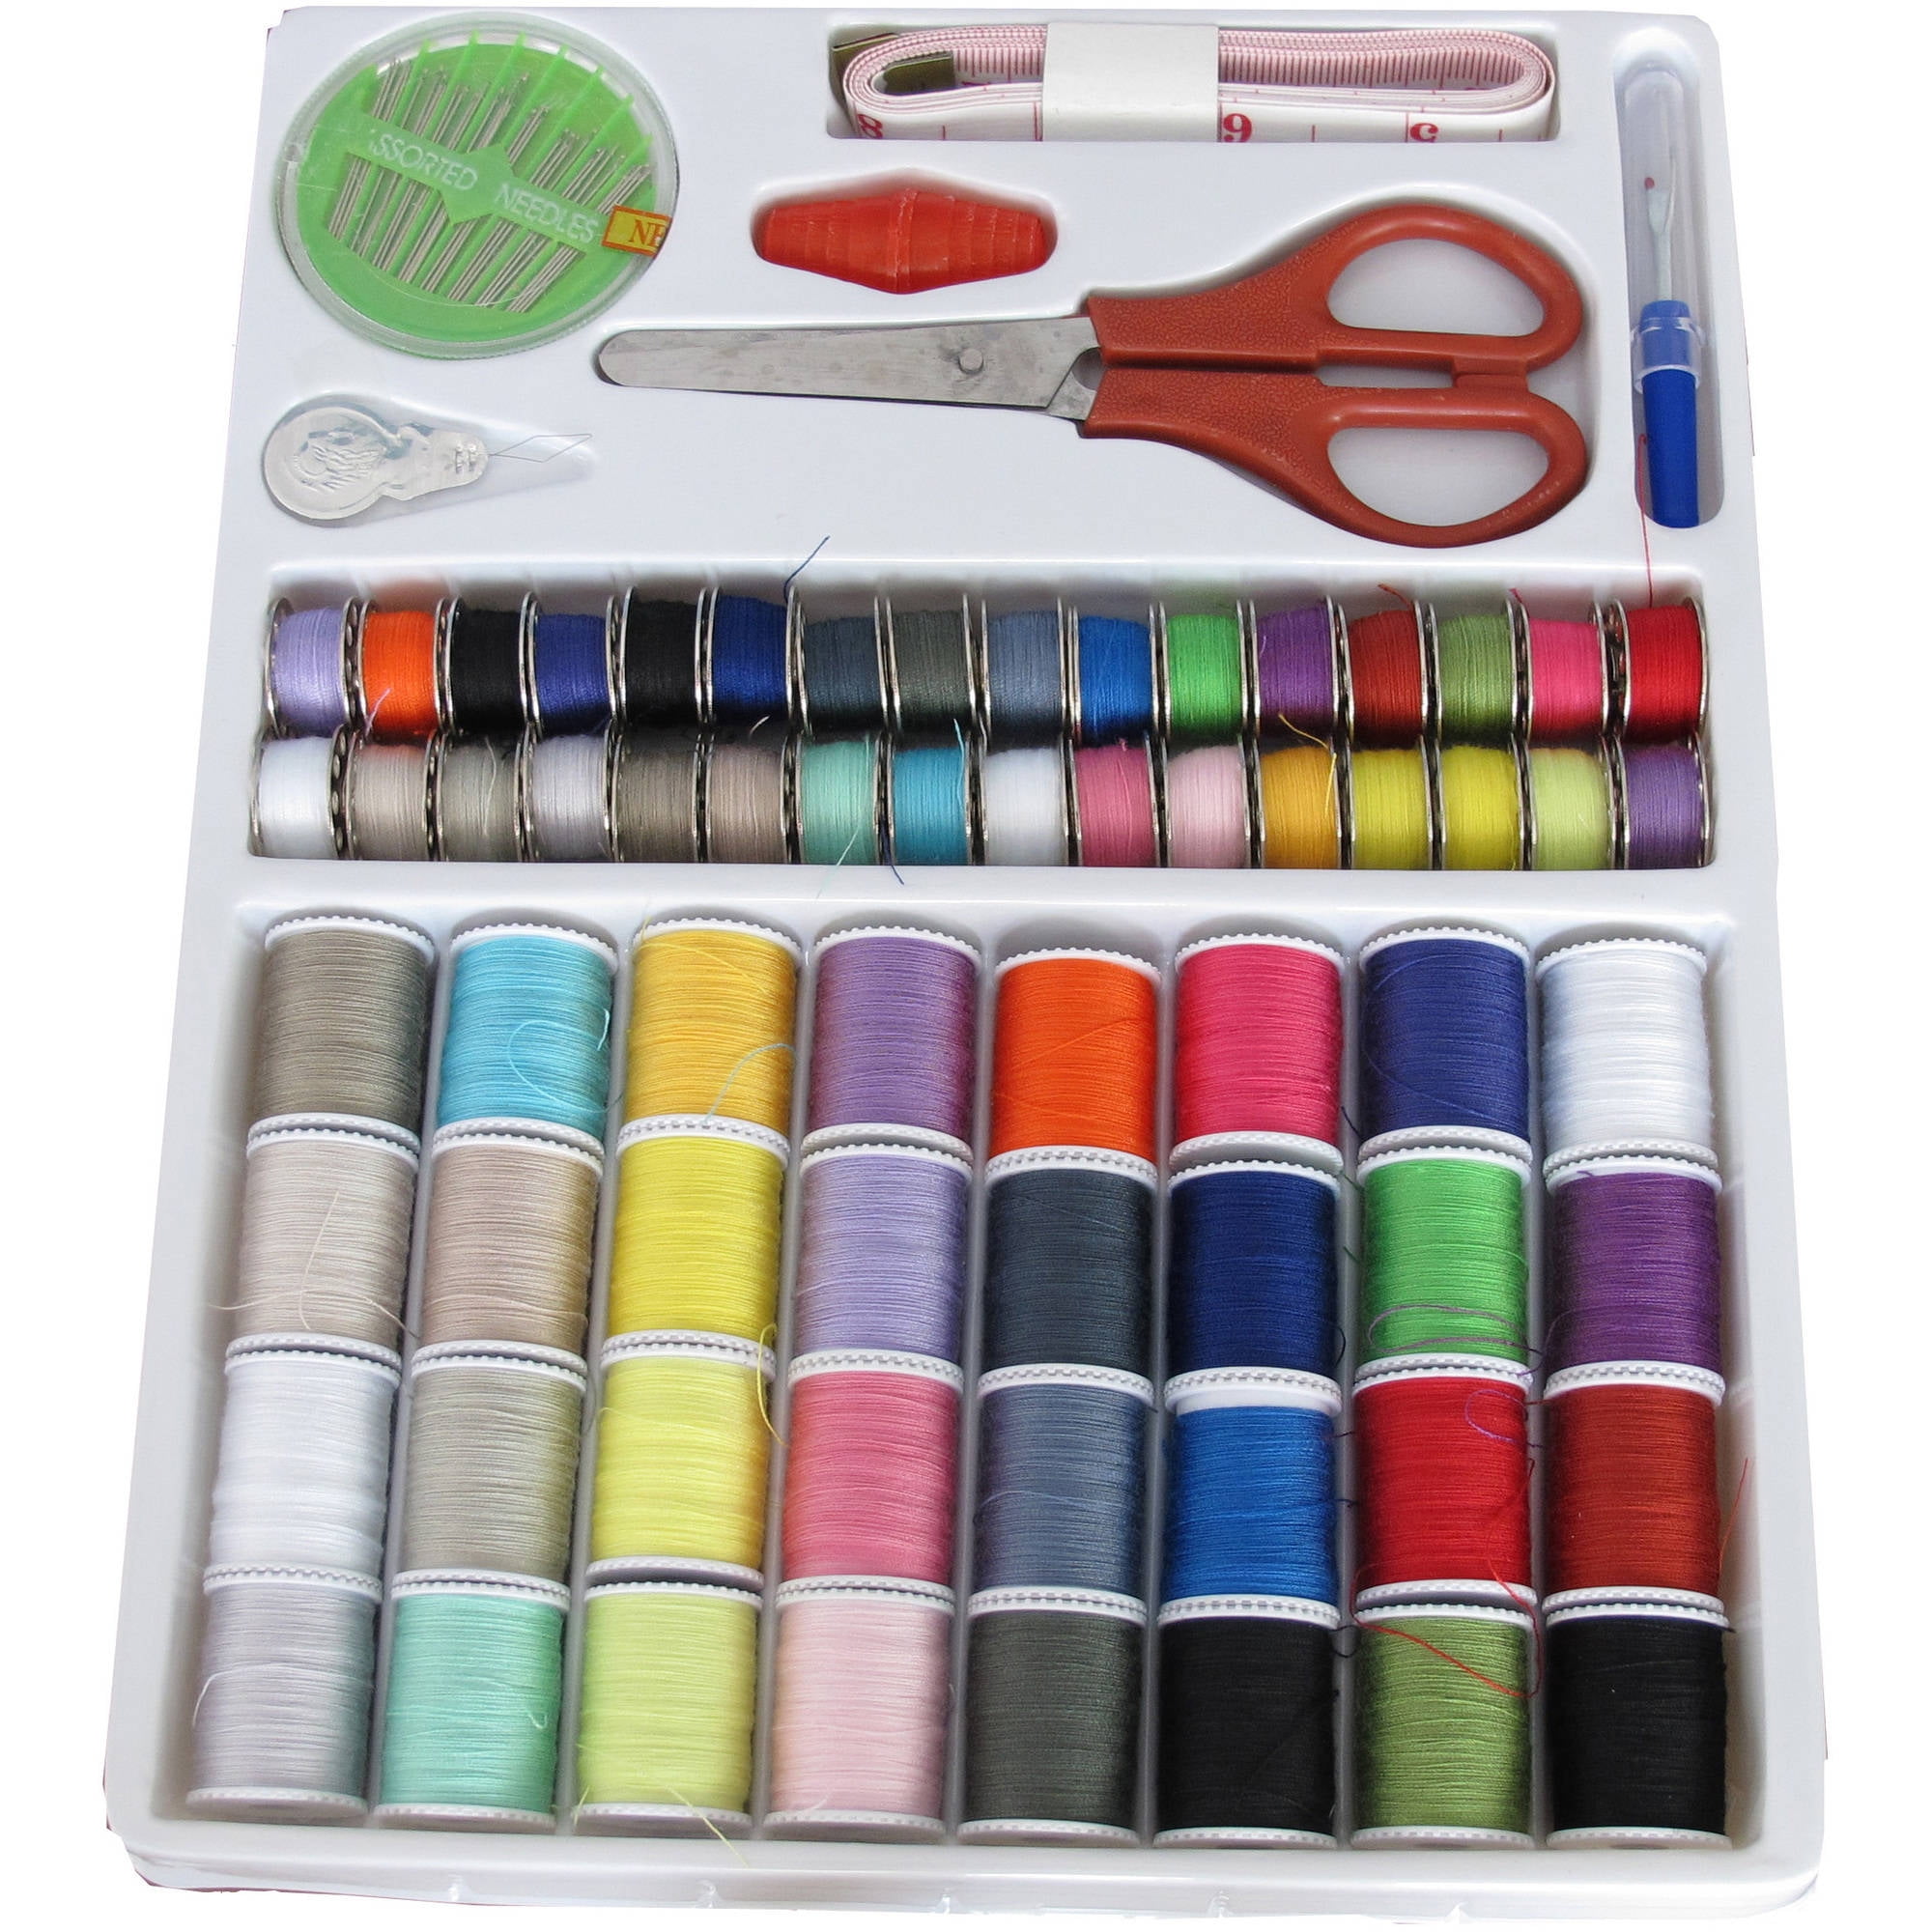 100 Packs Sewing Thread kit Sewing Kits for Adults Travel Sewing Kit Home